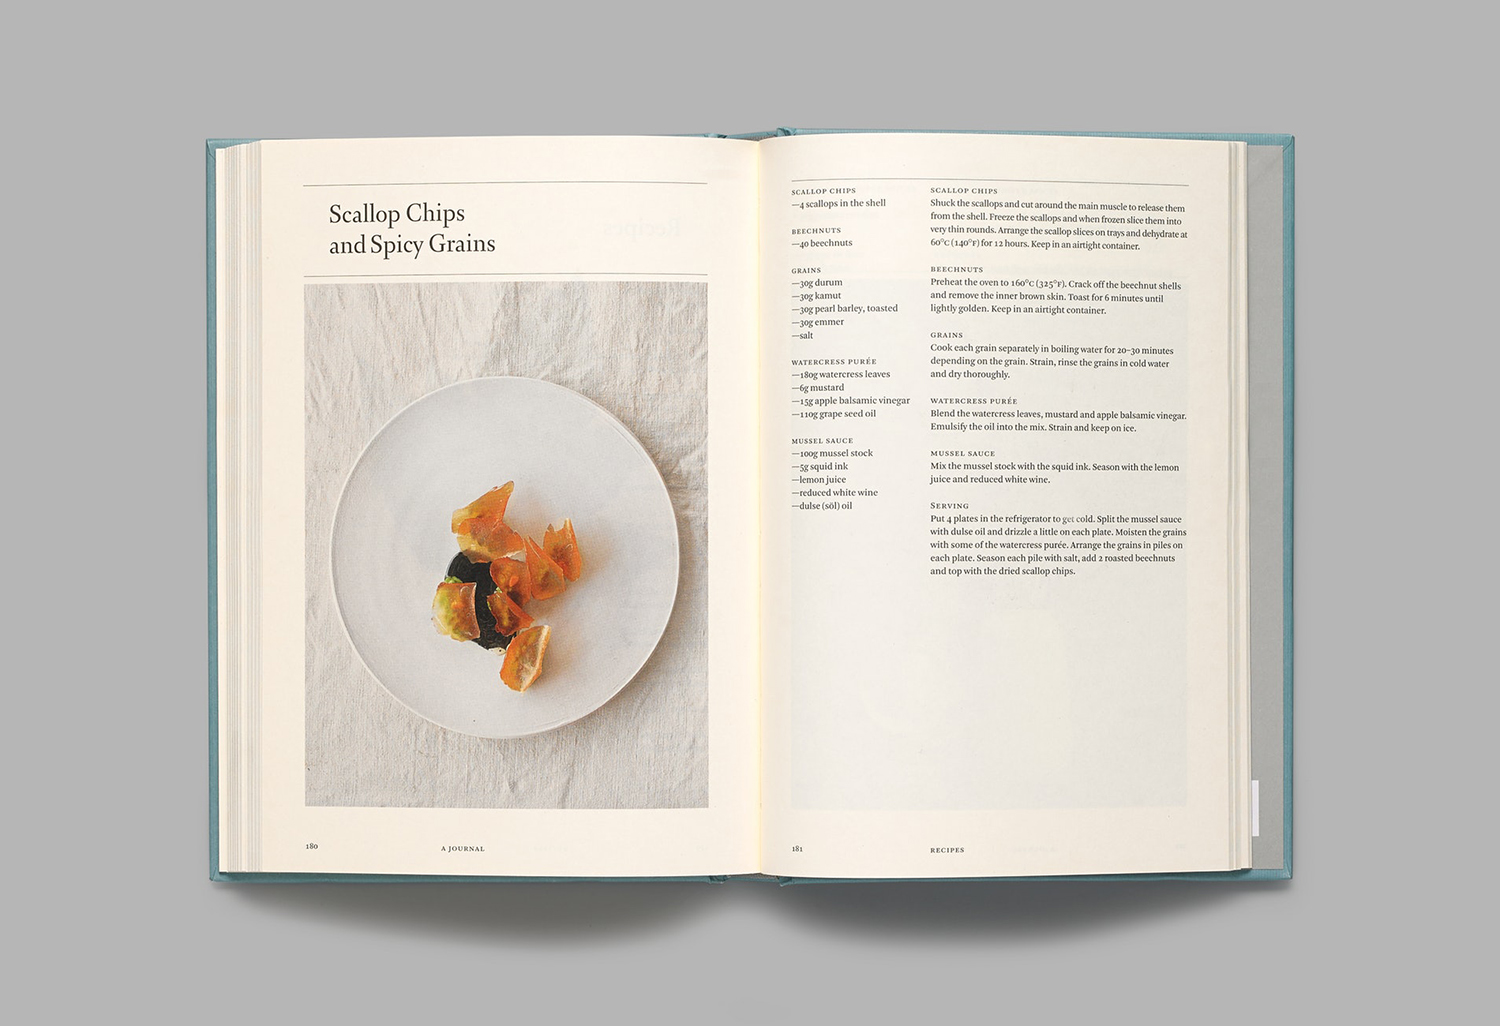 A new book from the acclaimed Danish chef and Noma creator and owner René Redzepi, published by Phaidon and designed by Pentagram